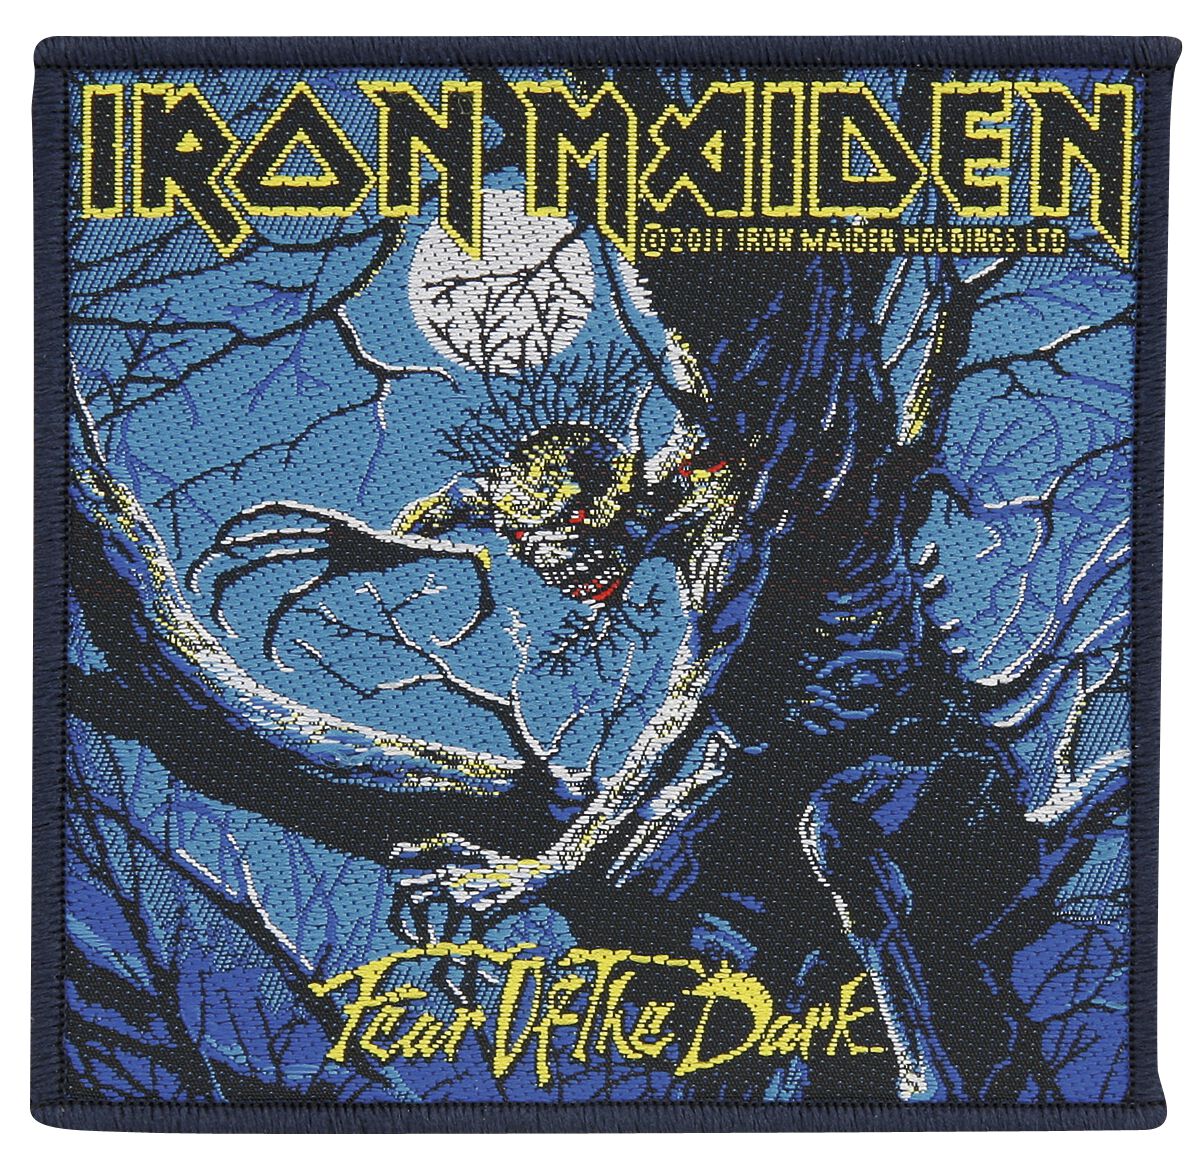 Iron Maiden - Fear of the dark - Patch - multicolor